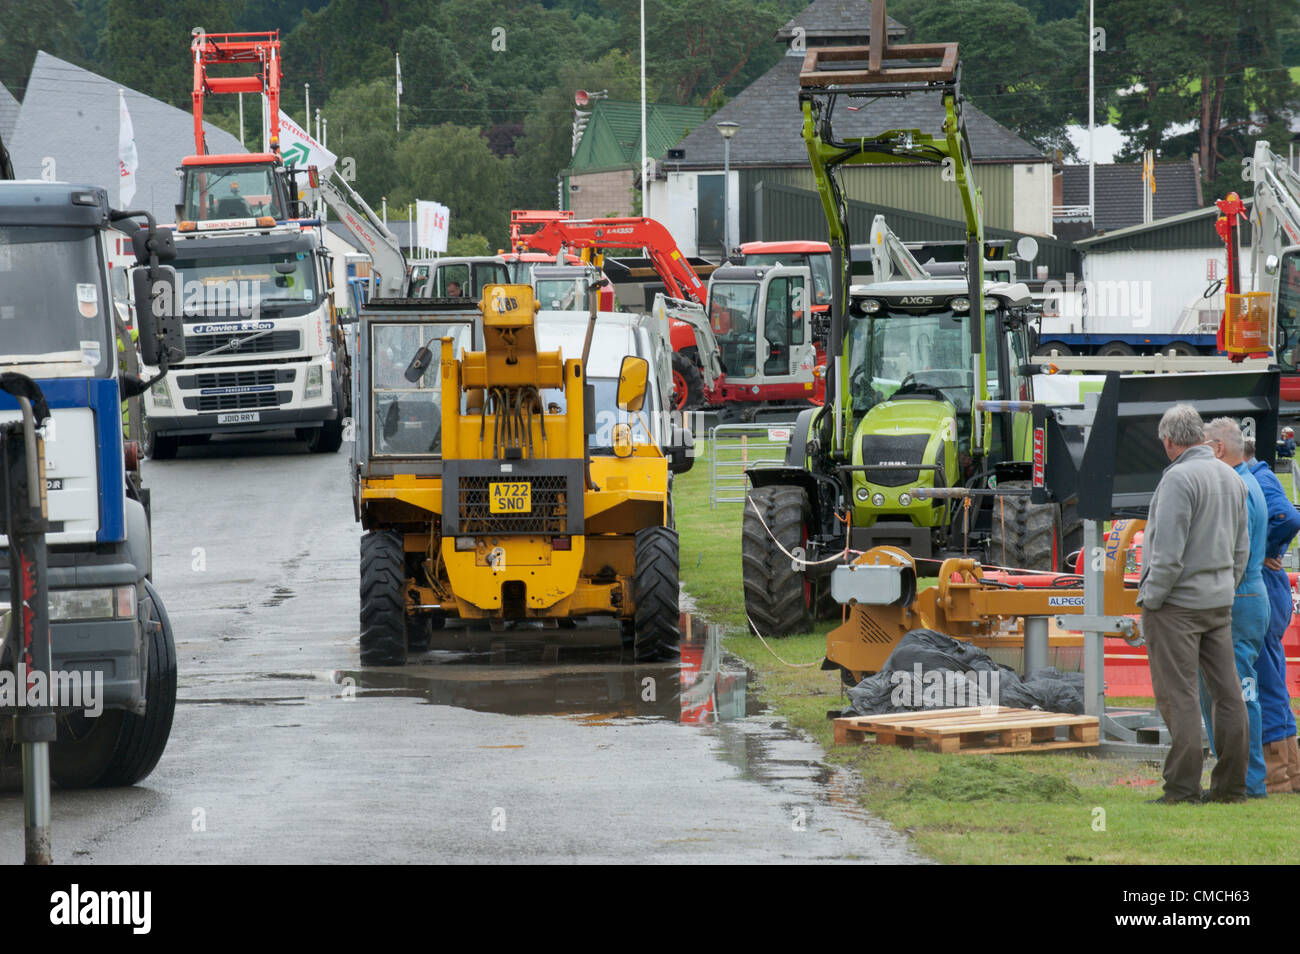 July 18th 2012. Builth Wells, Wales, UK. New agricultural machinery arrives at the showground for the Royal Welsh Showground. Organisers are optimistic for fine weather next week when The Royal Welsh Show starts on Monday 23rd July 2012. Stock Photo